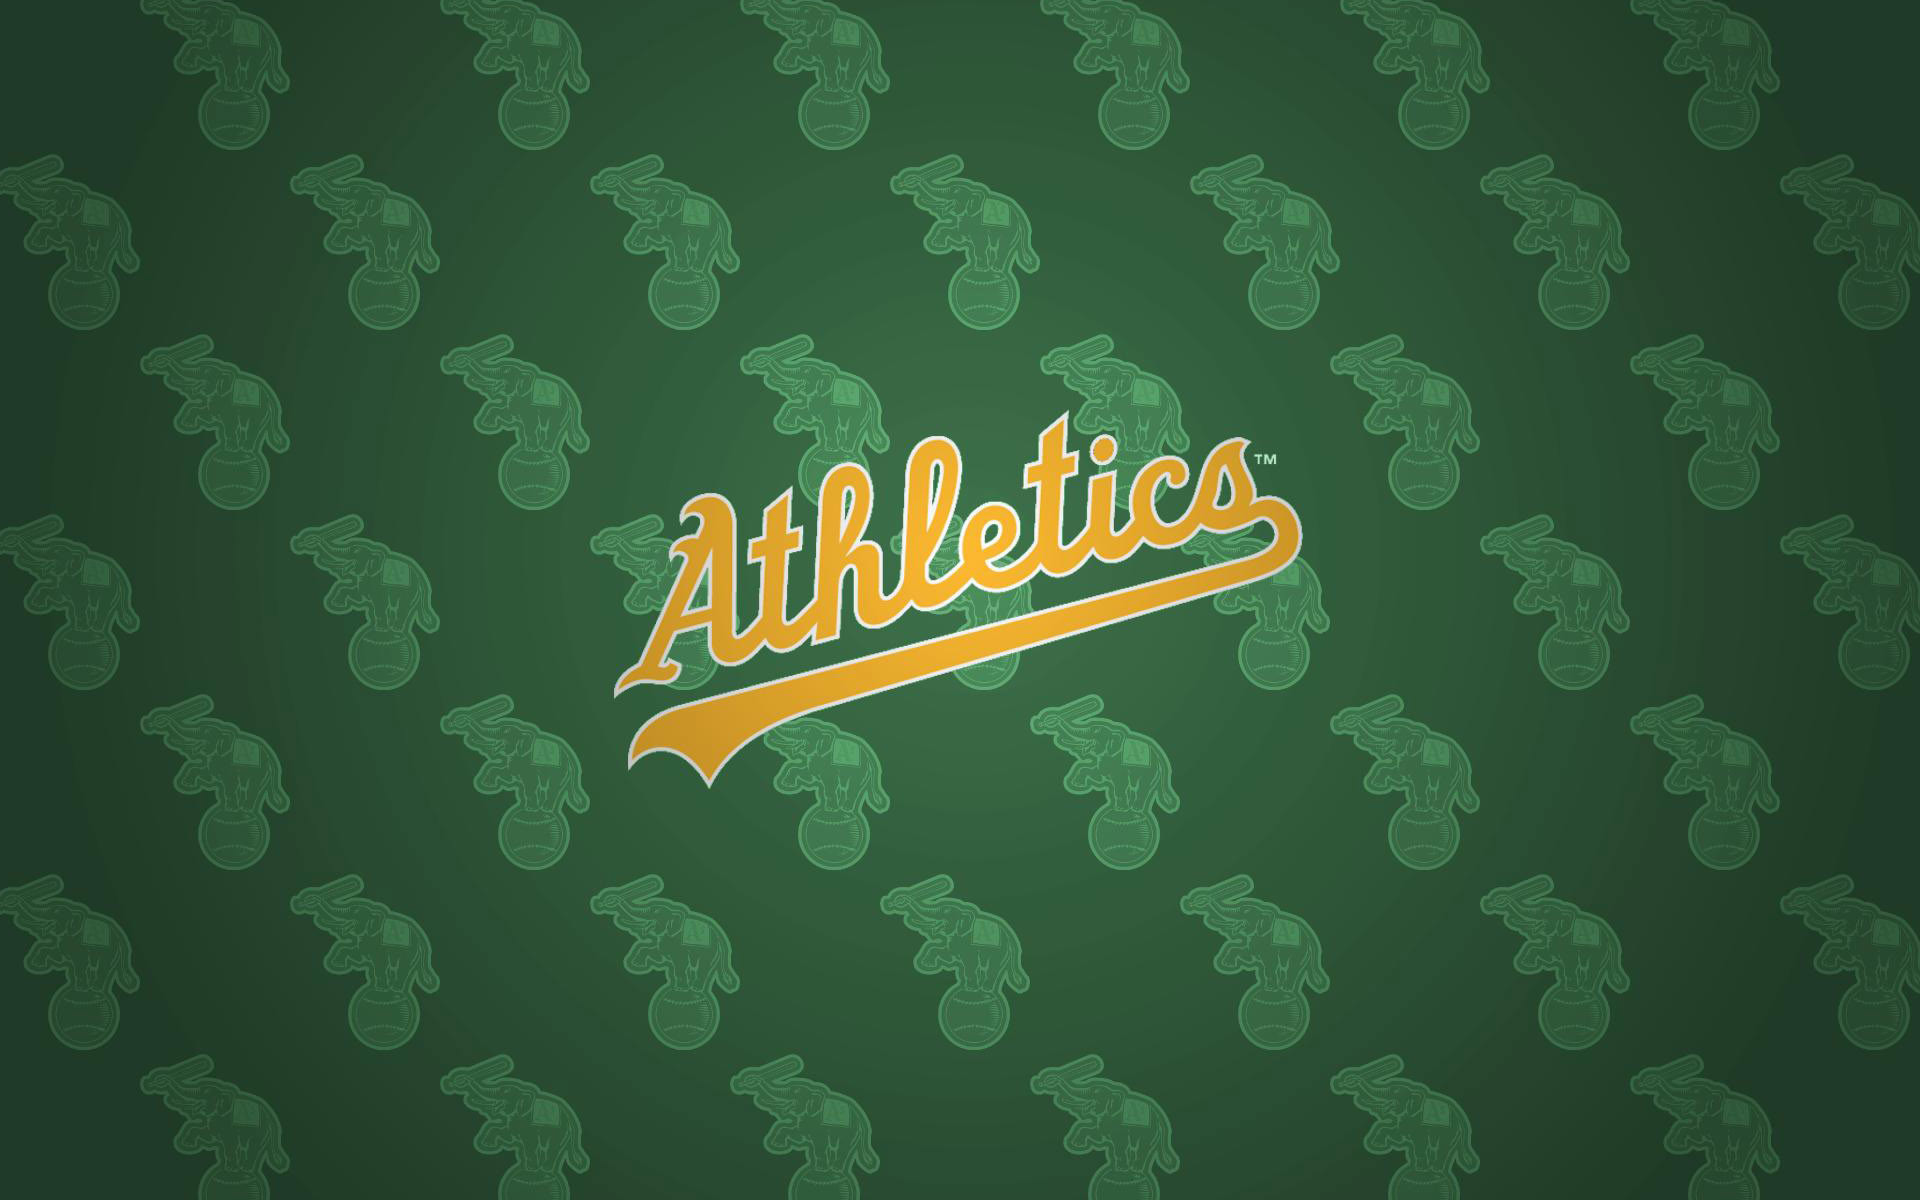 oakland athletics wallpapers 68 pictures oakland athletics wallpapers 68 pictures